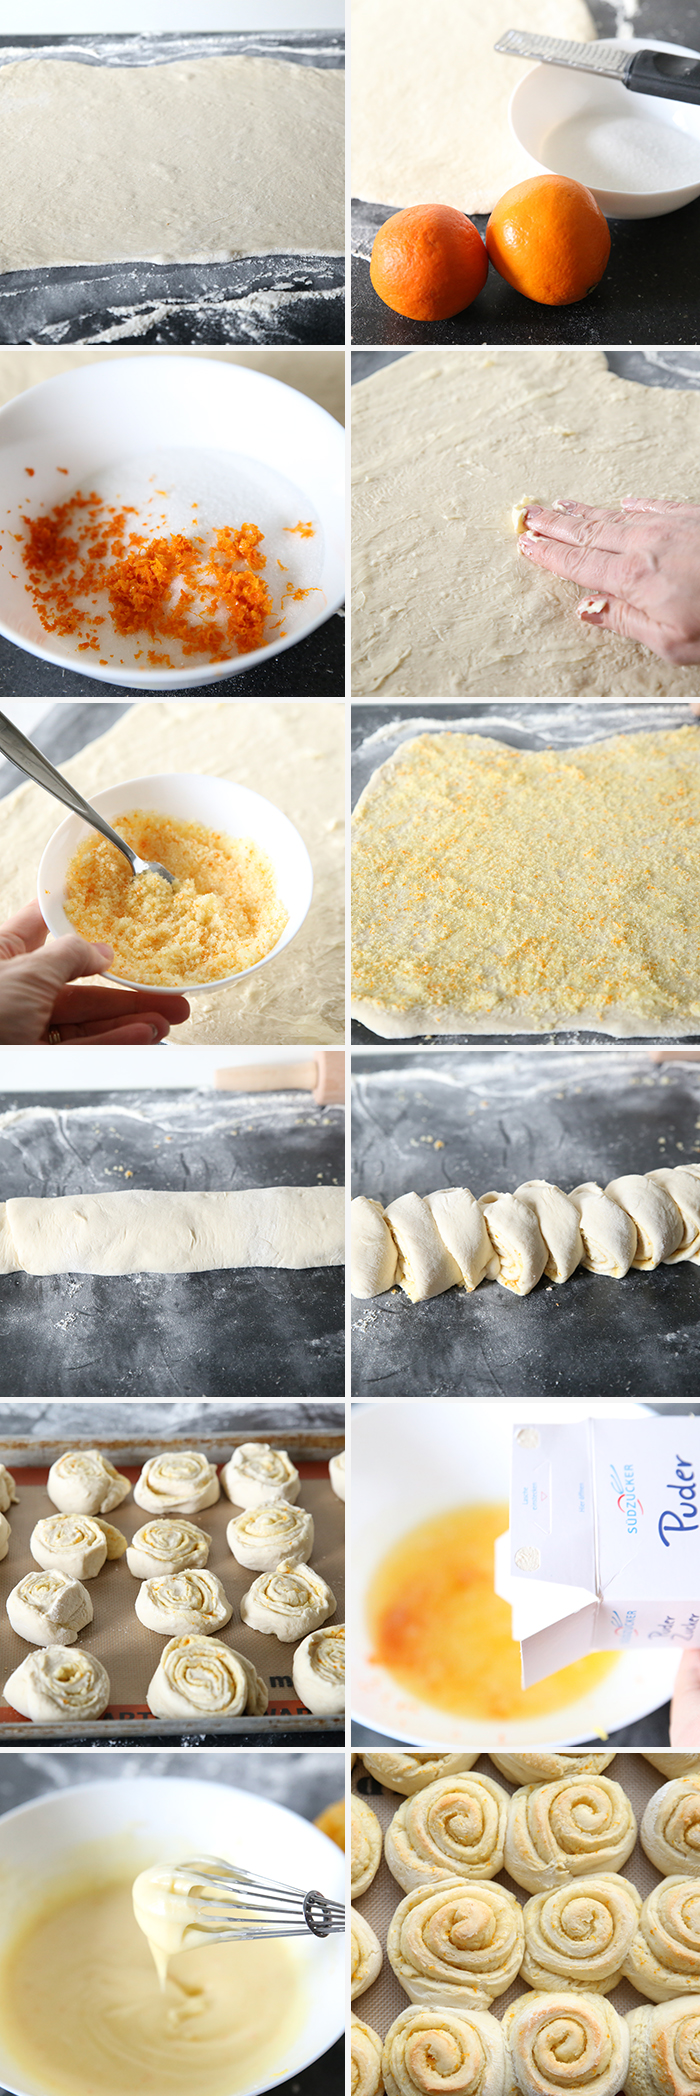 12-photo picture collage of step-by-step photos on how to make Easy Homemade Orange Rolls